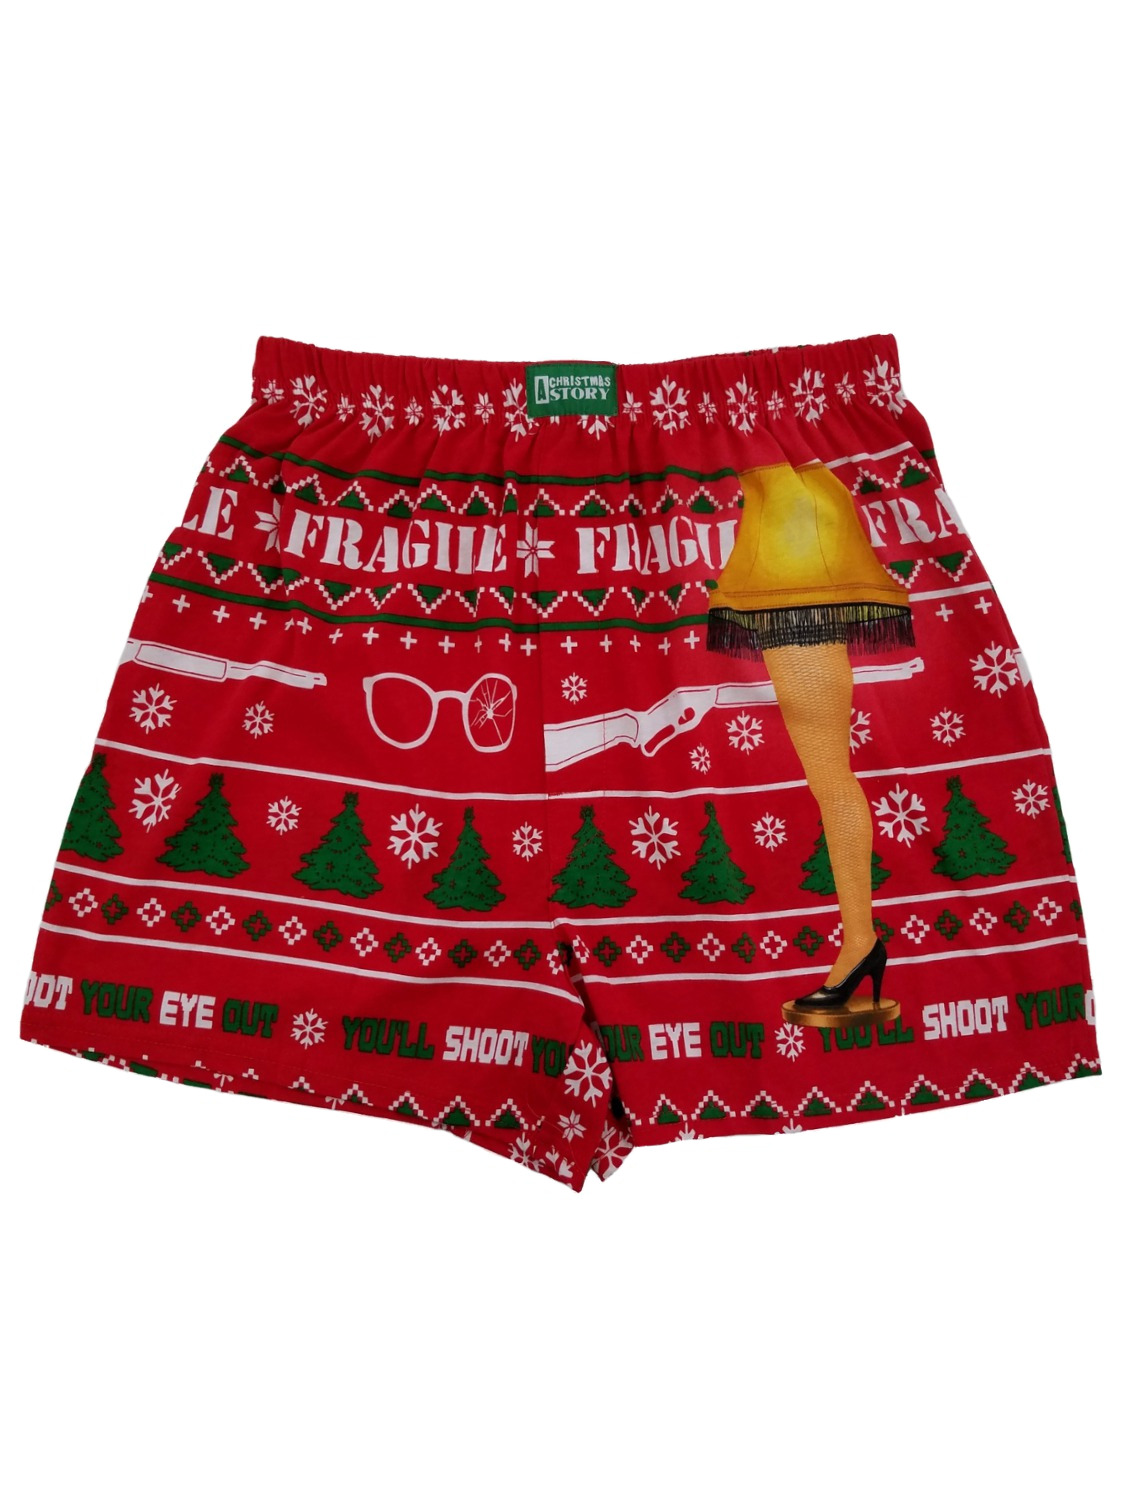 A Christmas Story Mens Red Fragile Leg Lamp Underwear Boxers Boxer Shorts S